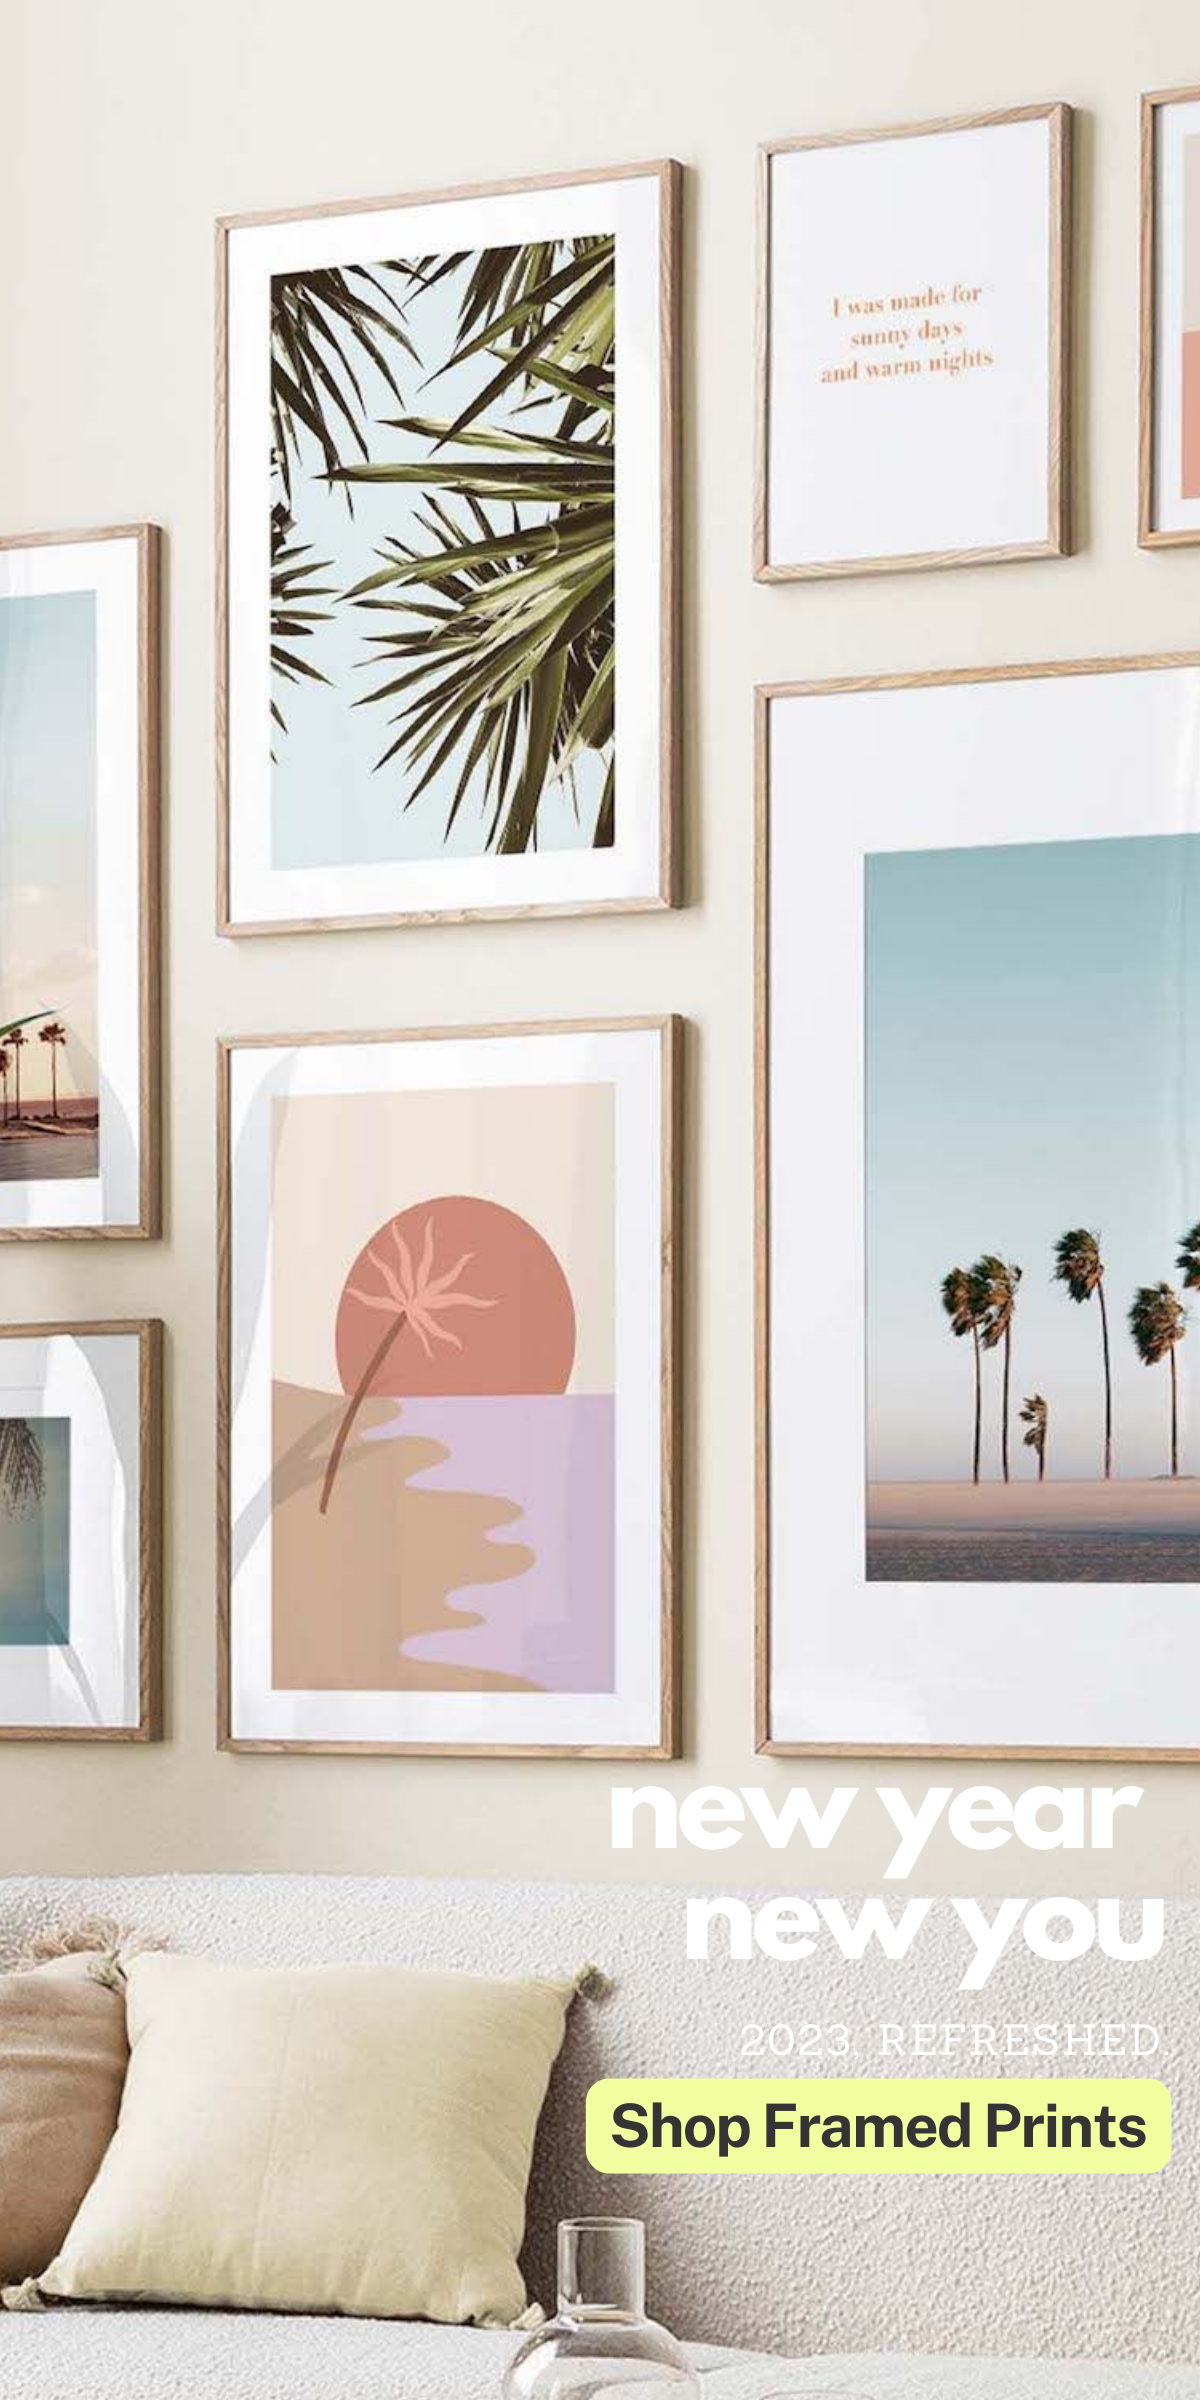 New Year New You - Framed Prints